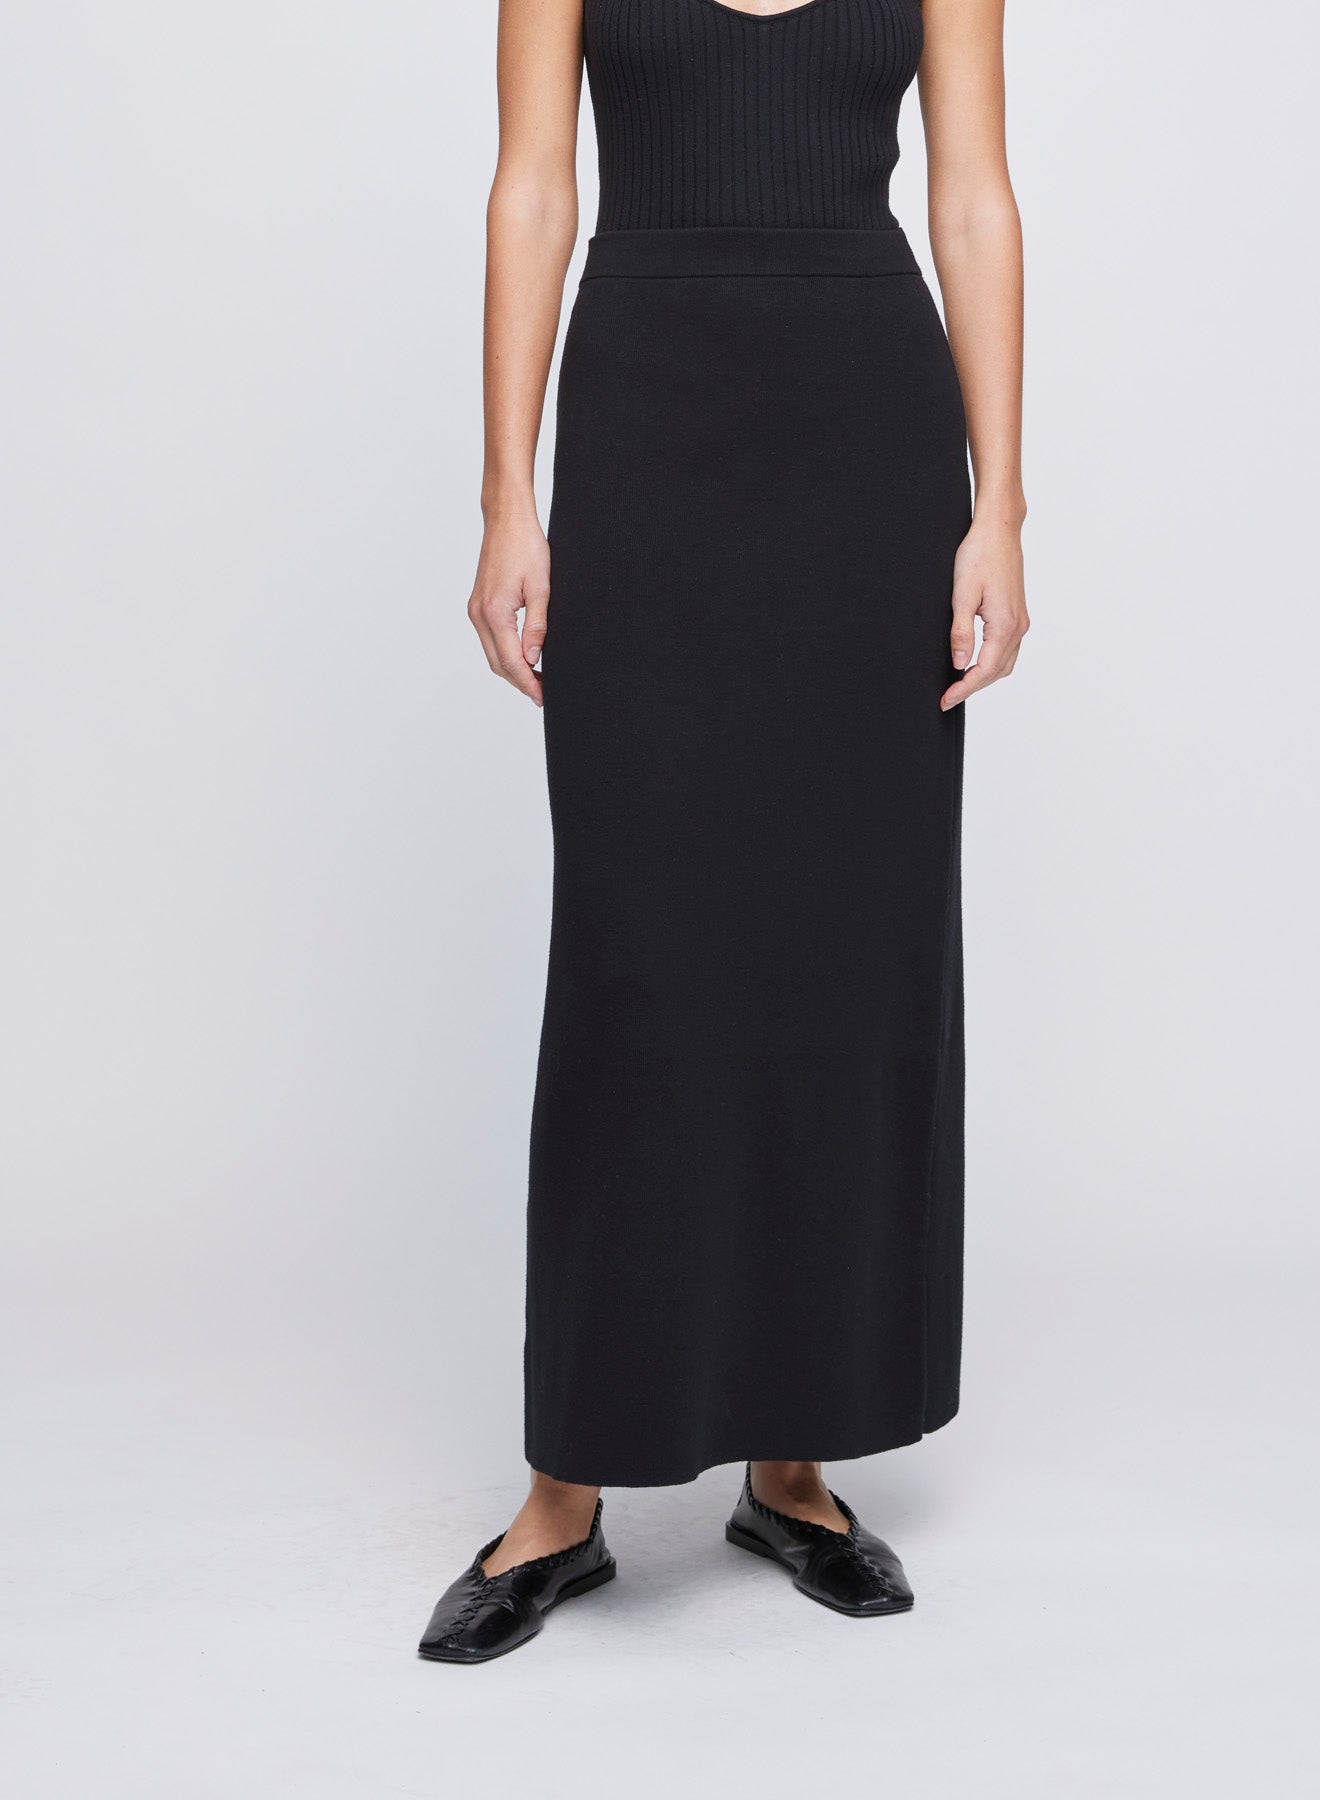 The ANNA QUAN Ines Skirt in Raven is a 100% cotton knit skirt, designed with an elasticated waistband for ease of styling.